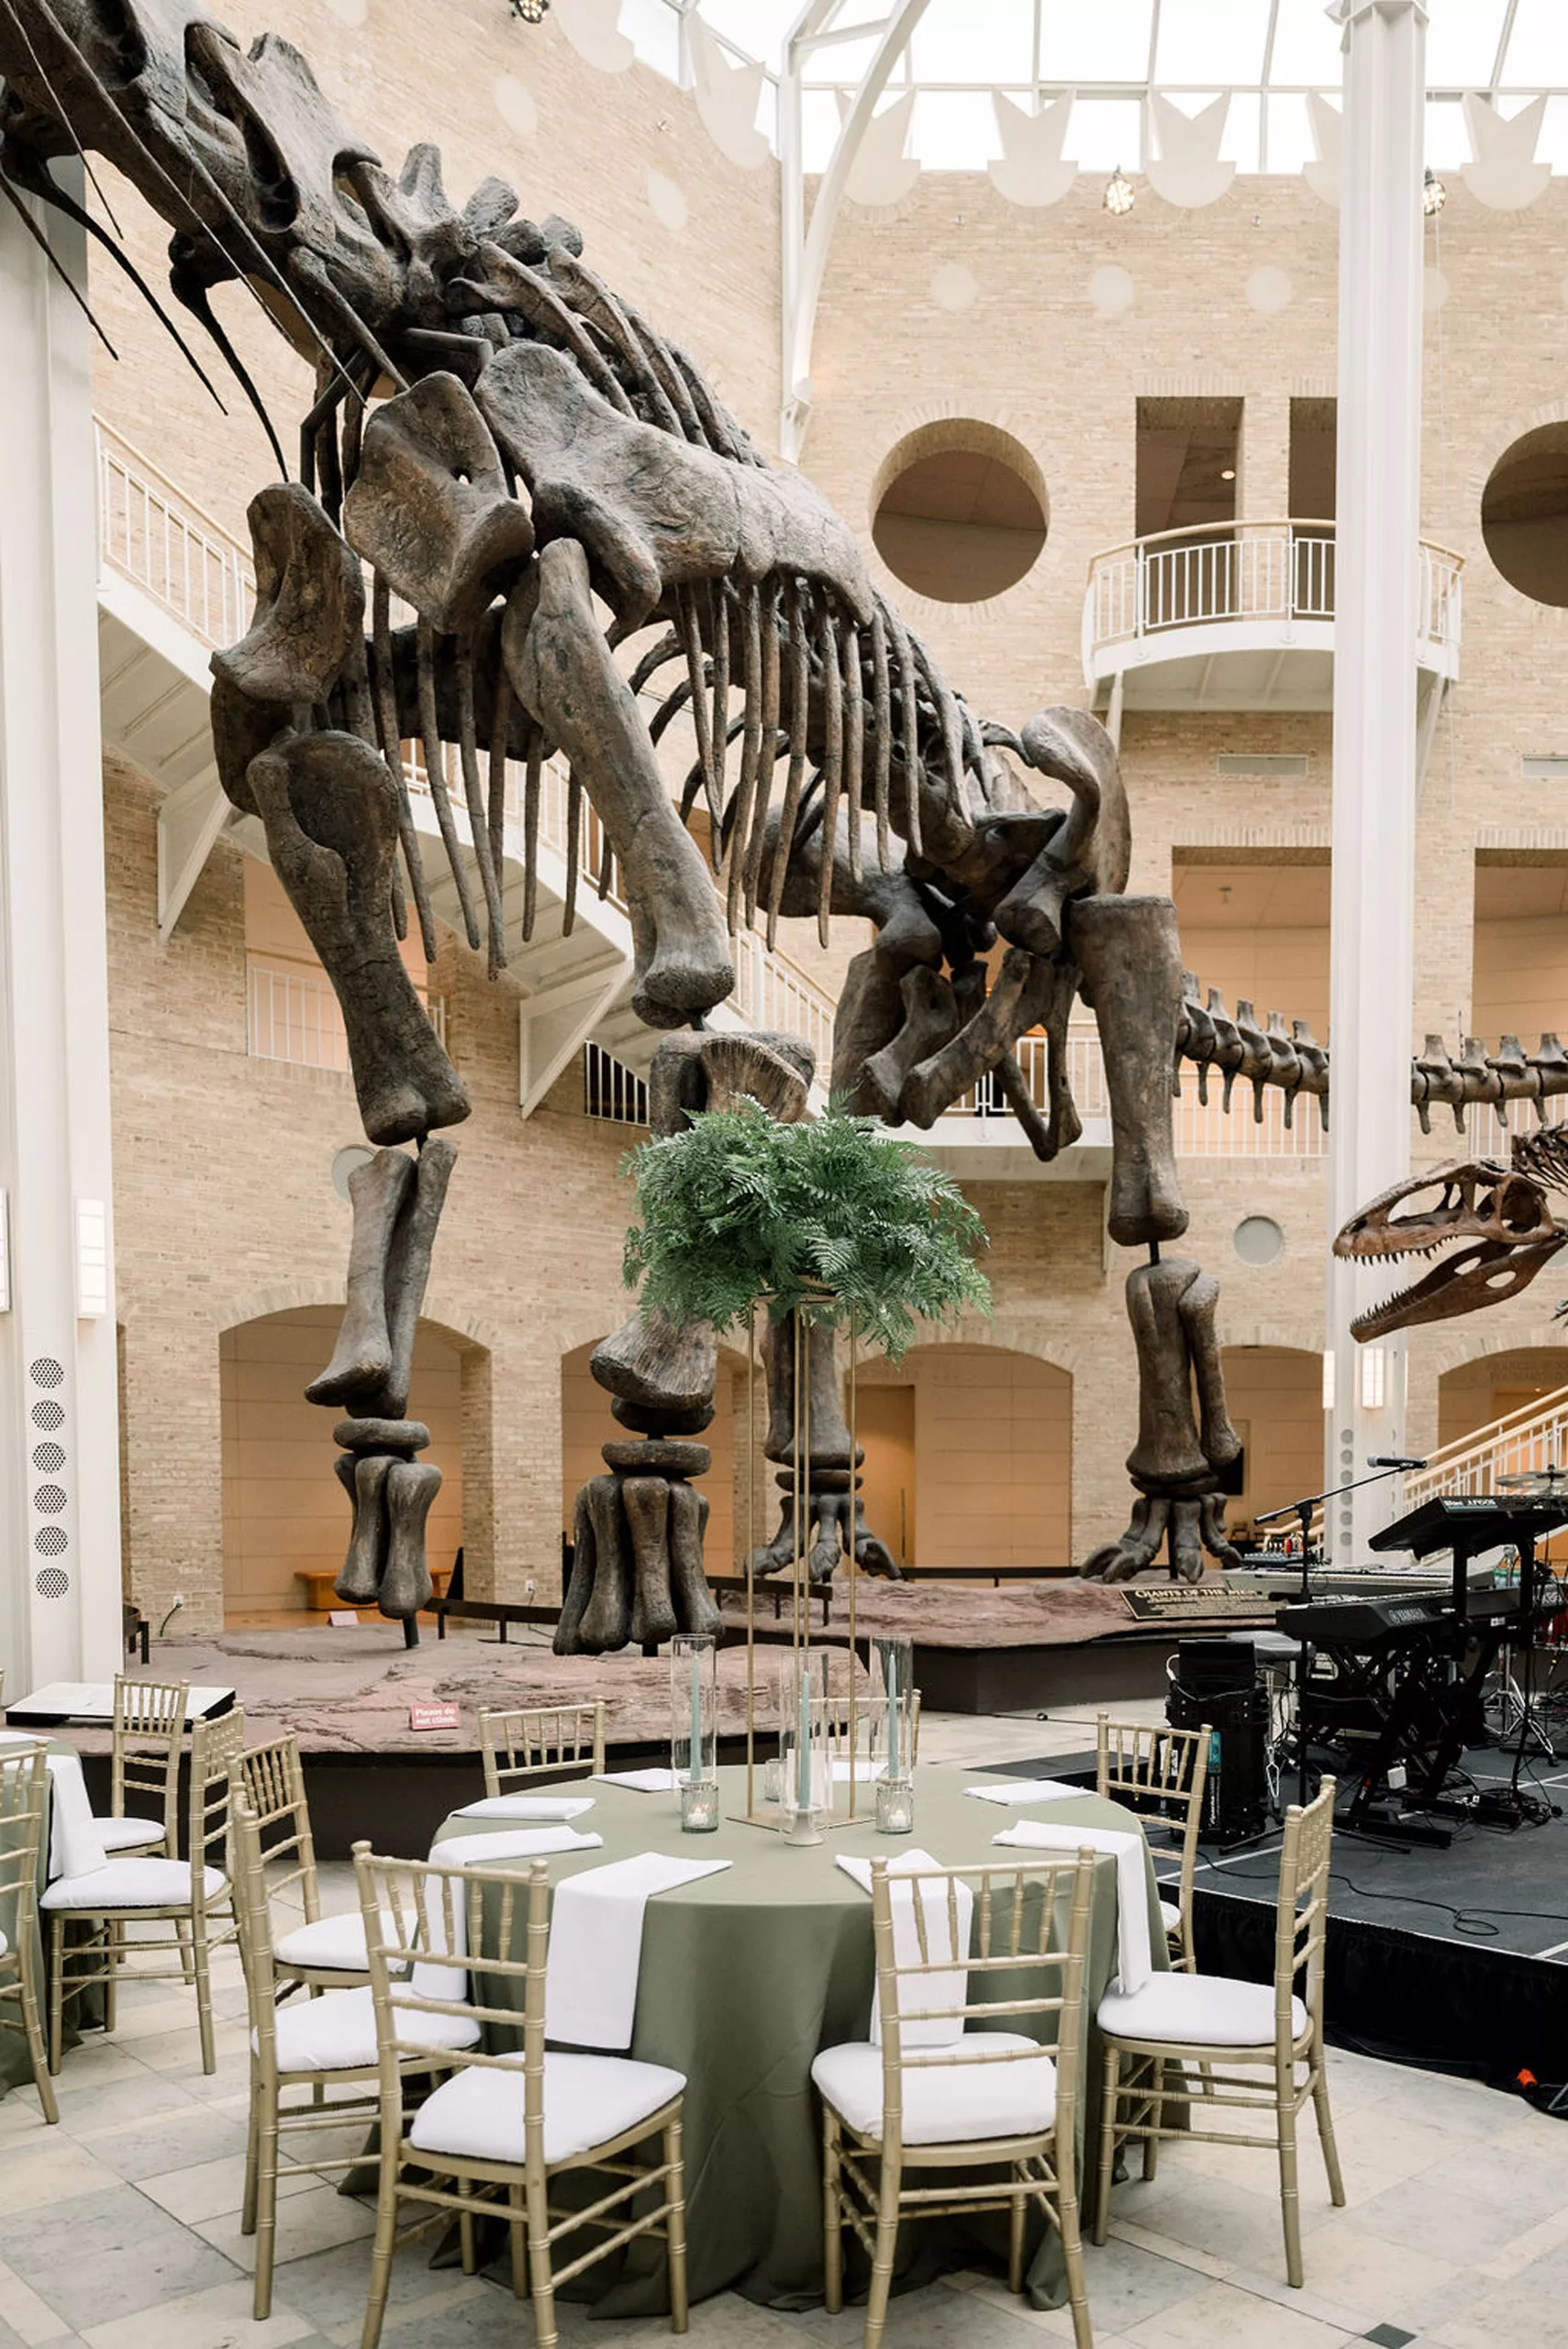 Details of a wedding reception table setup under a large dinosaur skeleton next to a band on a stage at a jurassic park wedding